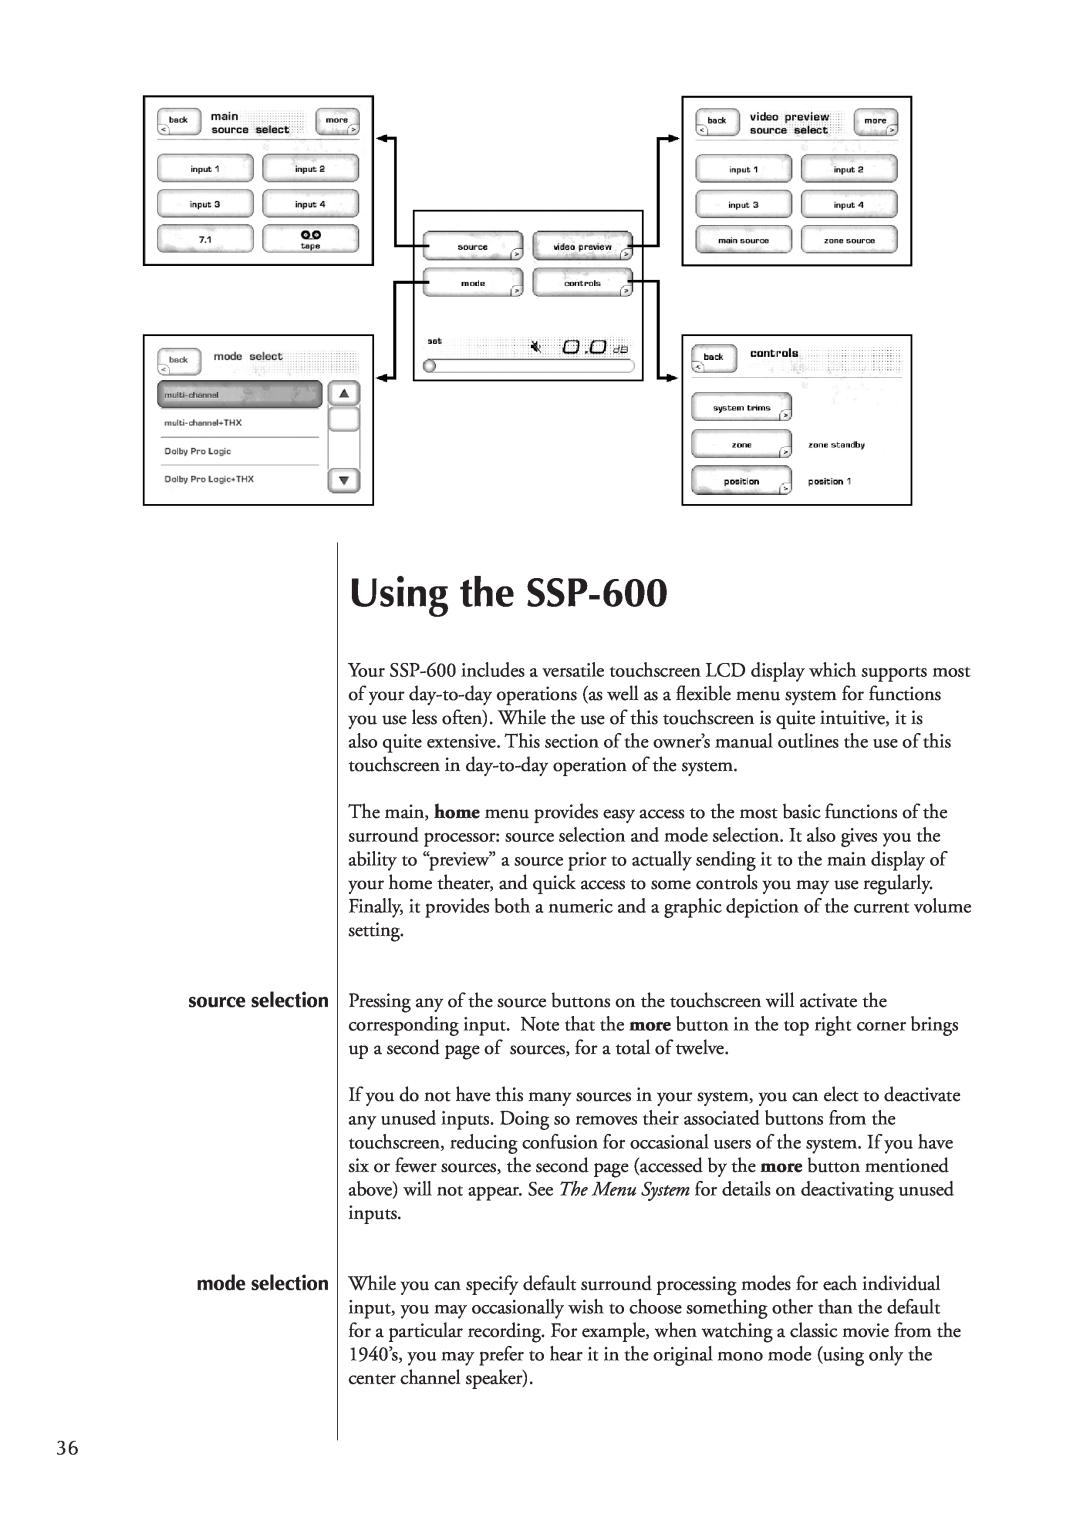 Classe Audio owner manual Using the SSP-600, source selection mode selection 